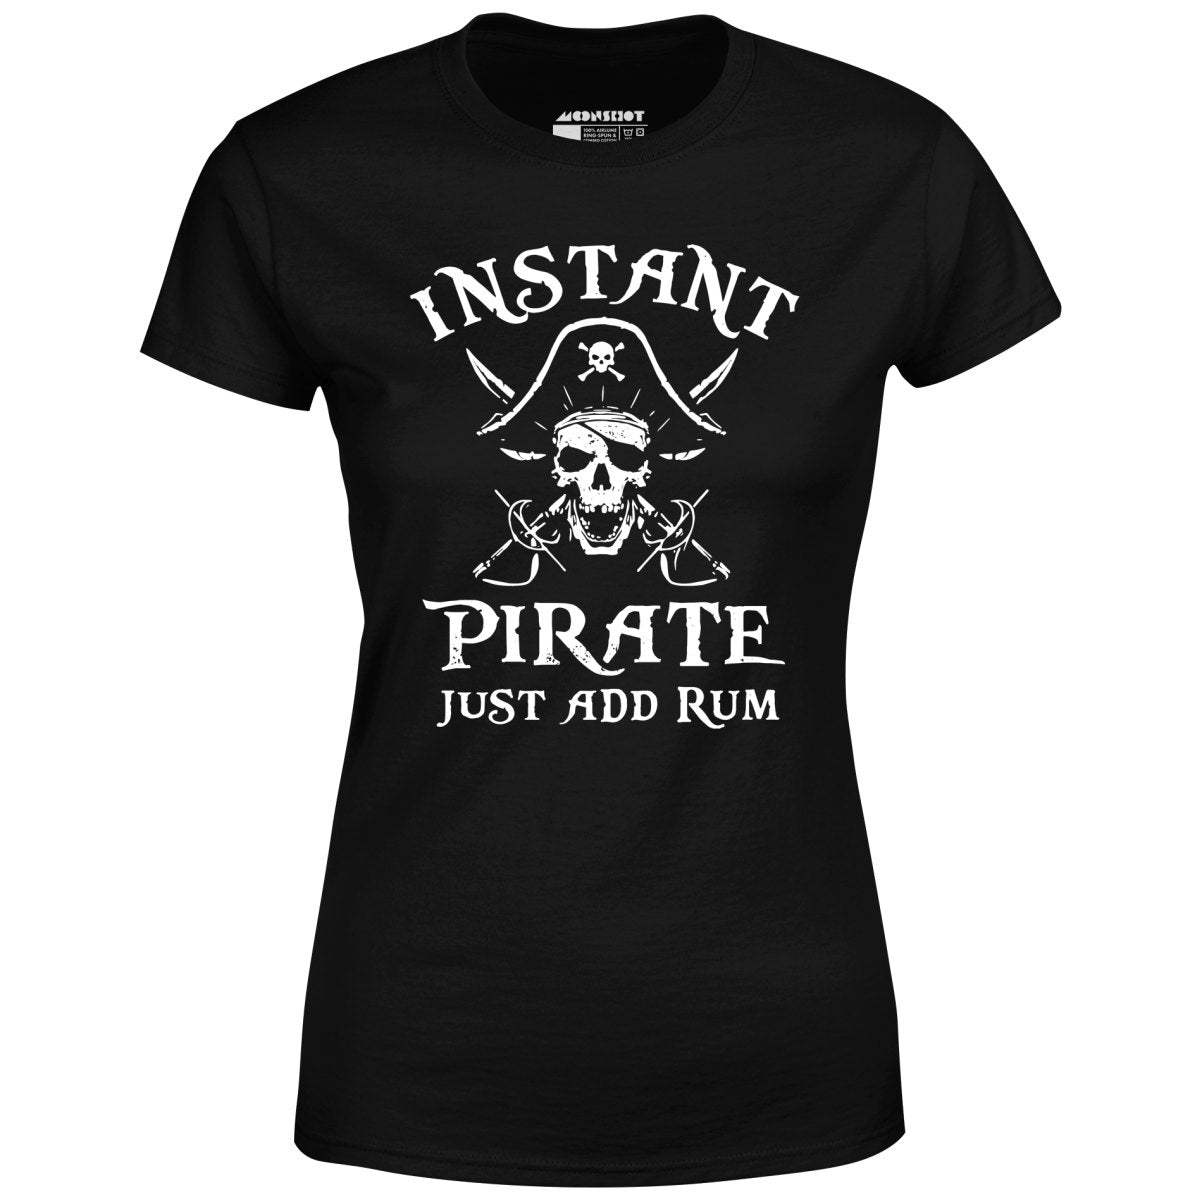 Instant Pirate Just Add Rum - Women's T-Shirt